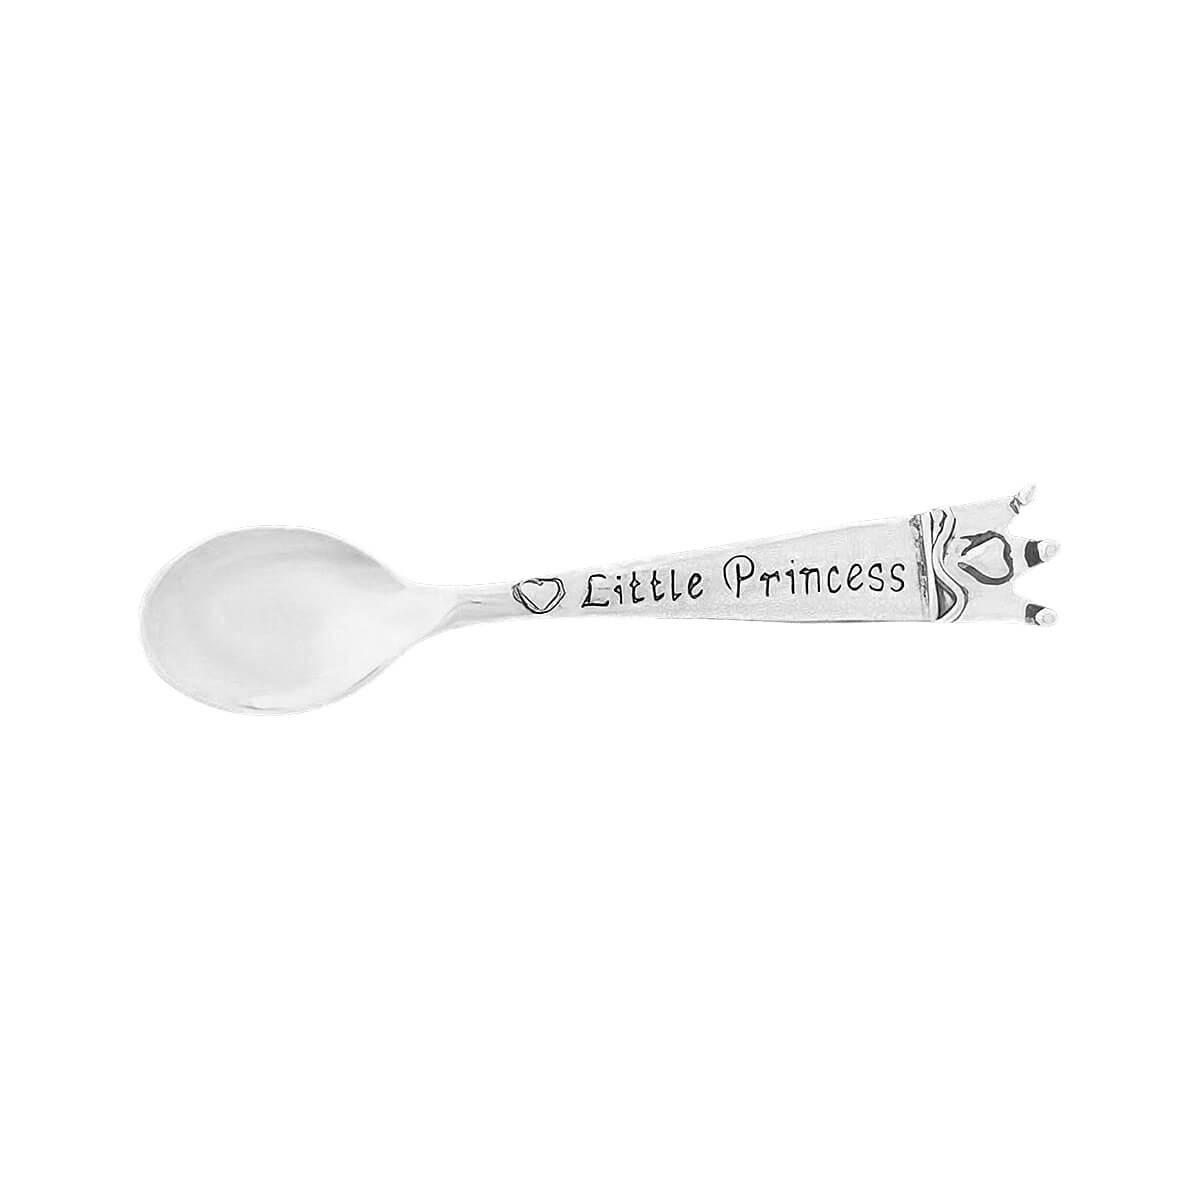  Little Princess Pewter Baby Spoon